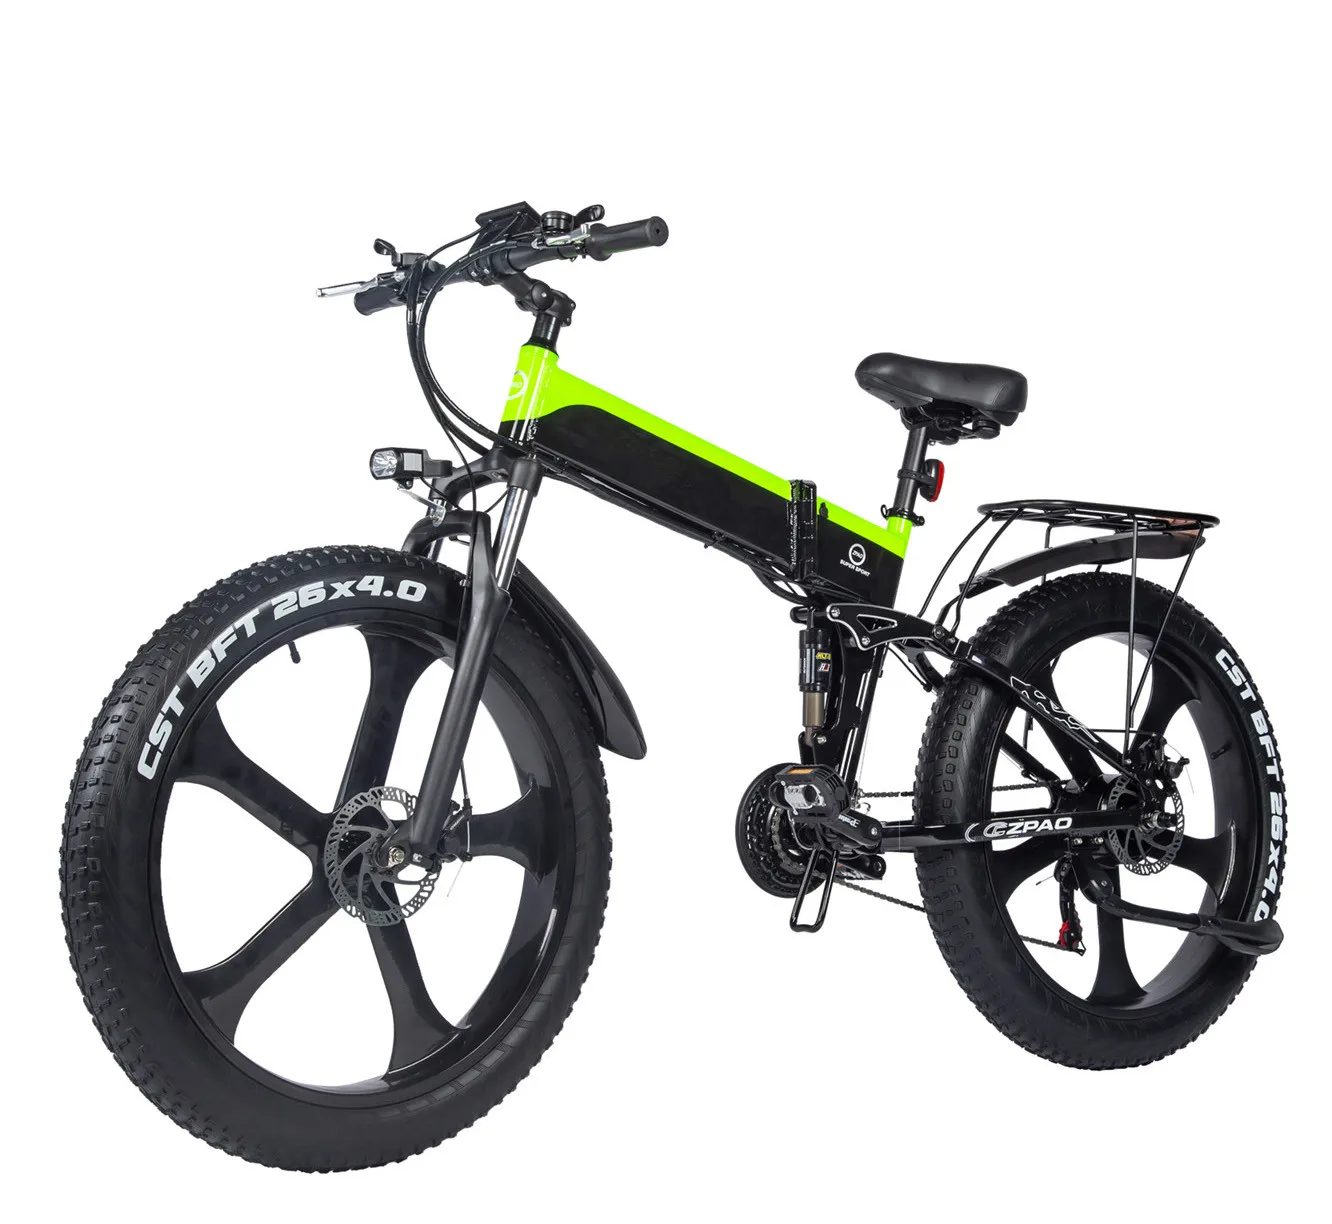 original factory price 26x4.0 fat tire adult electric bike 500W 750W electric bicycle foldable ebike wholesale ready to ship